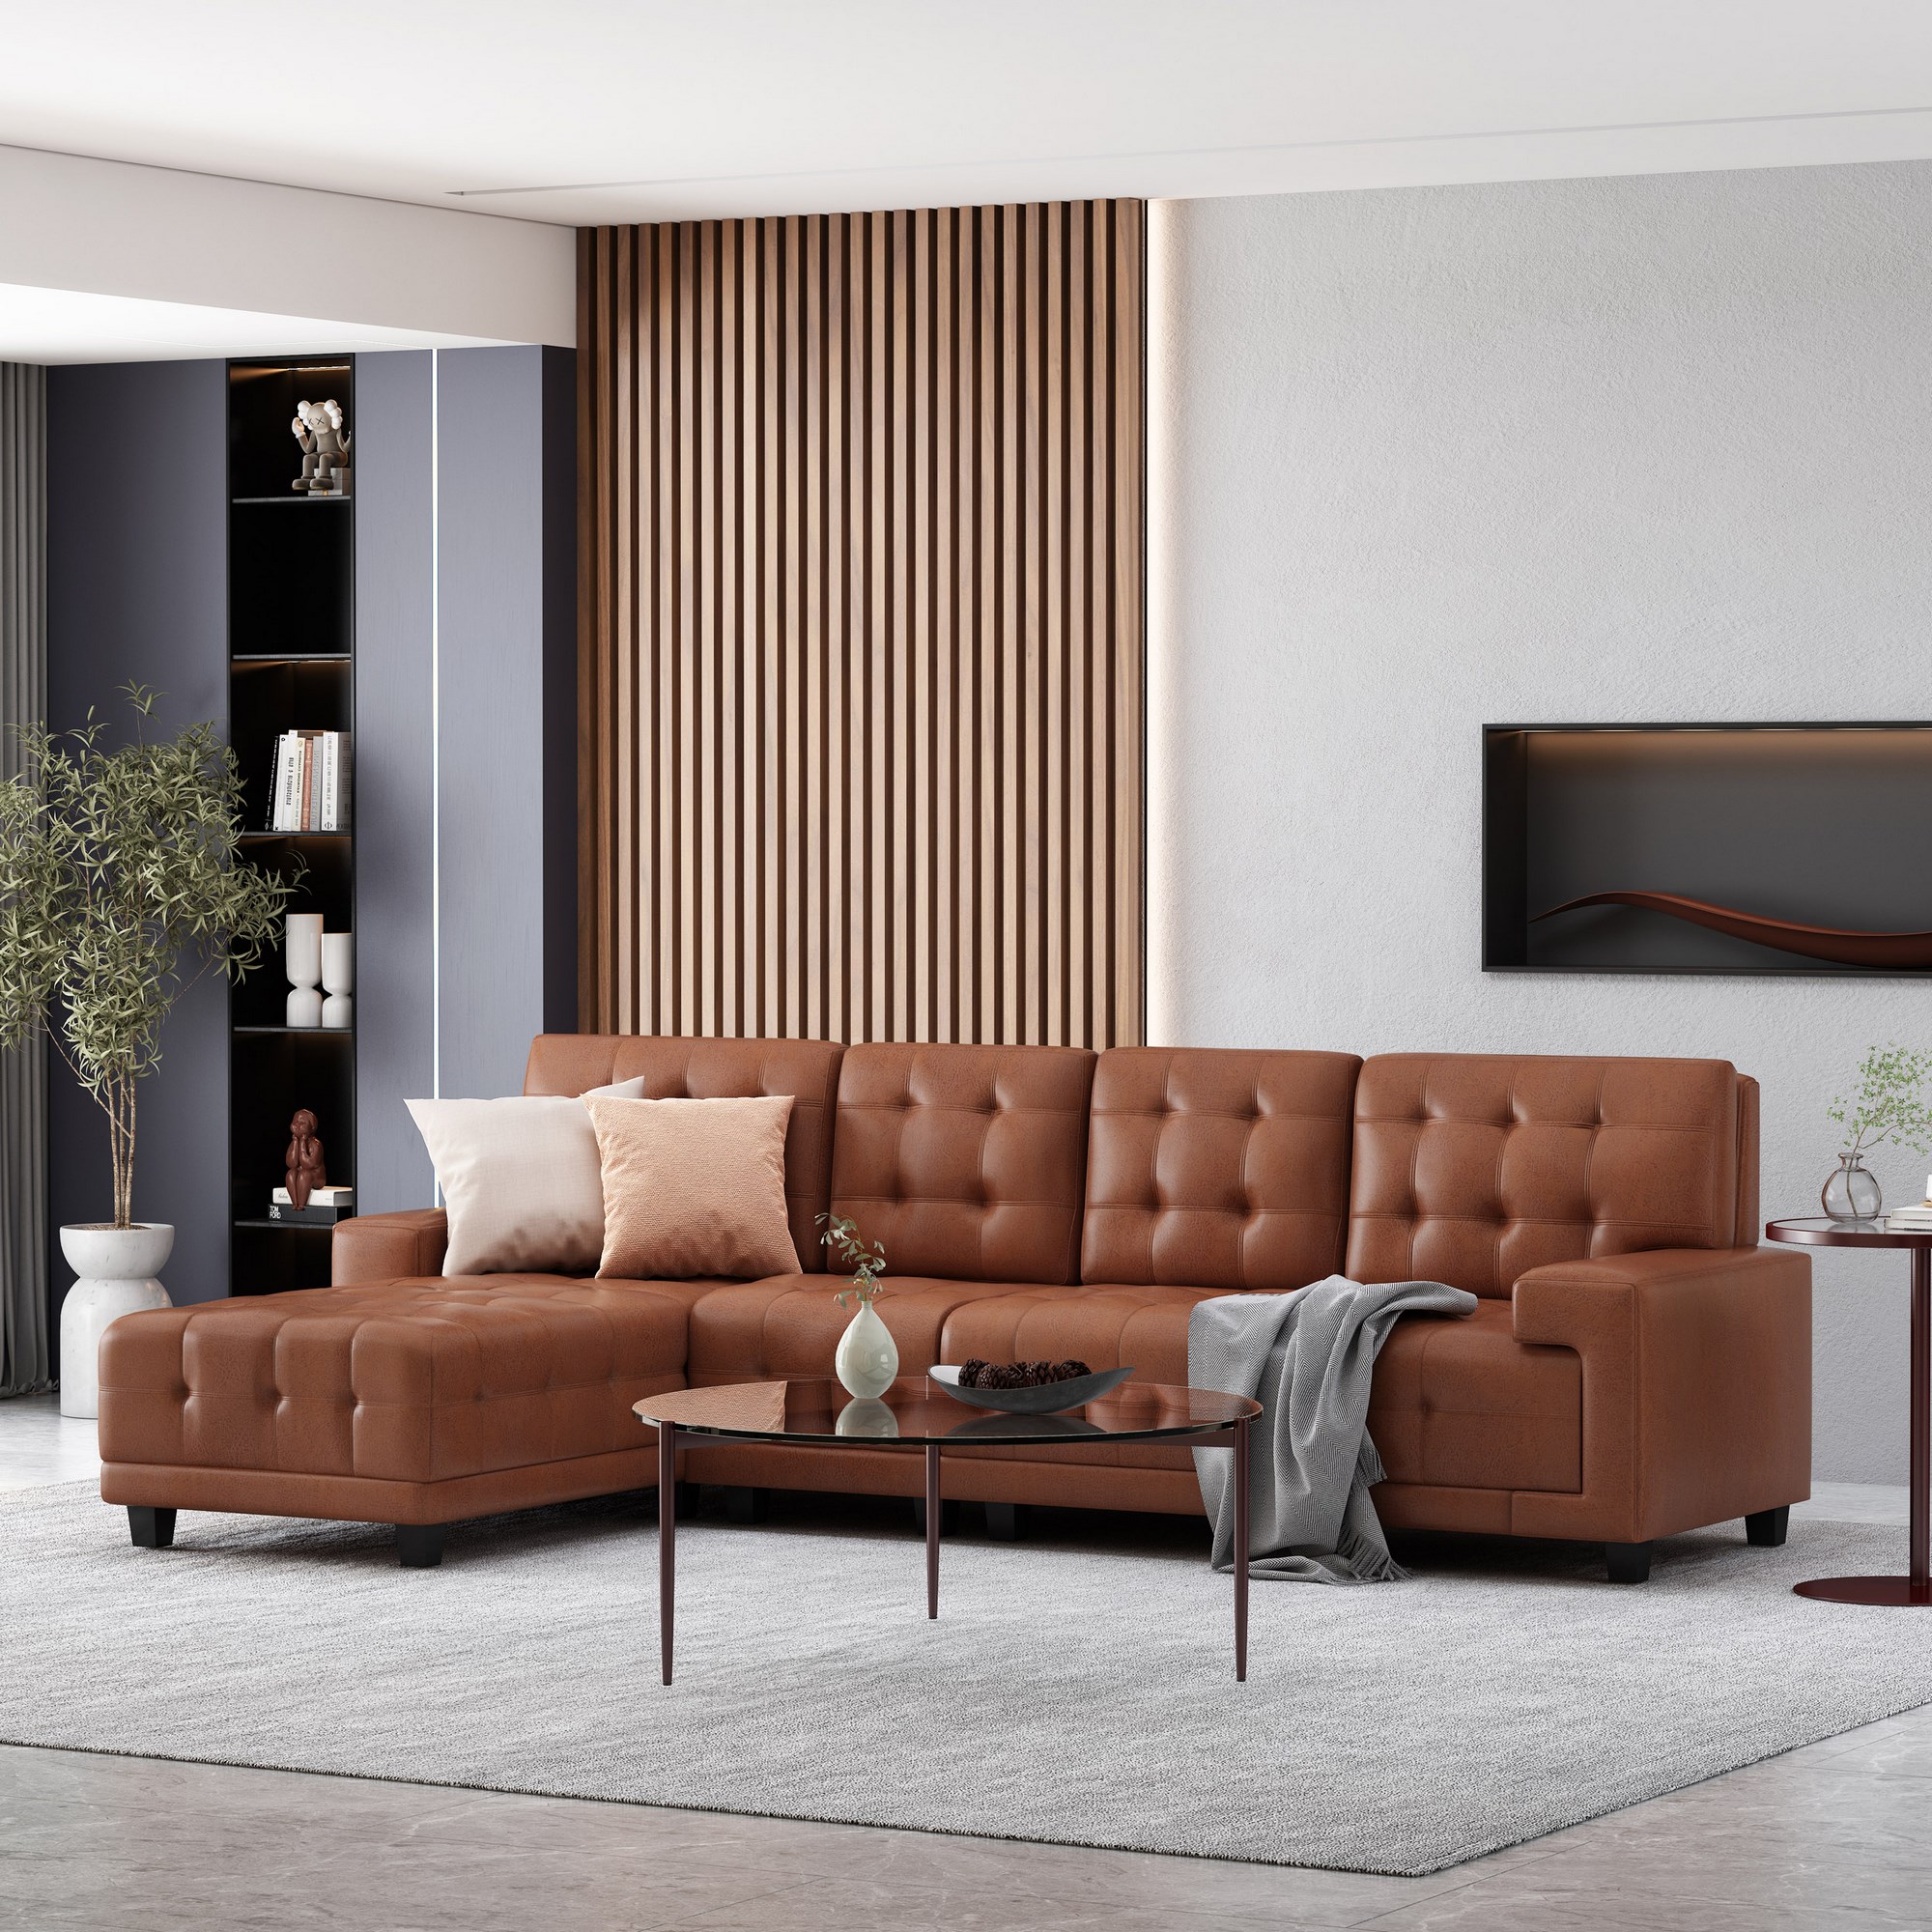 Torrent muis of rat ZuidAmerika Harlar Contemporary Faux Leather Tufted 4 Seater Sectional Sofa and Chaise Lounge  Set, Cognac Brown and Dark Brown